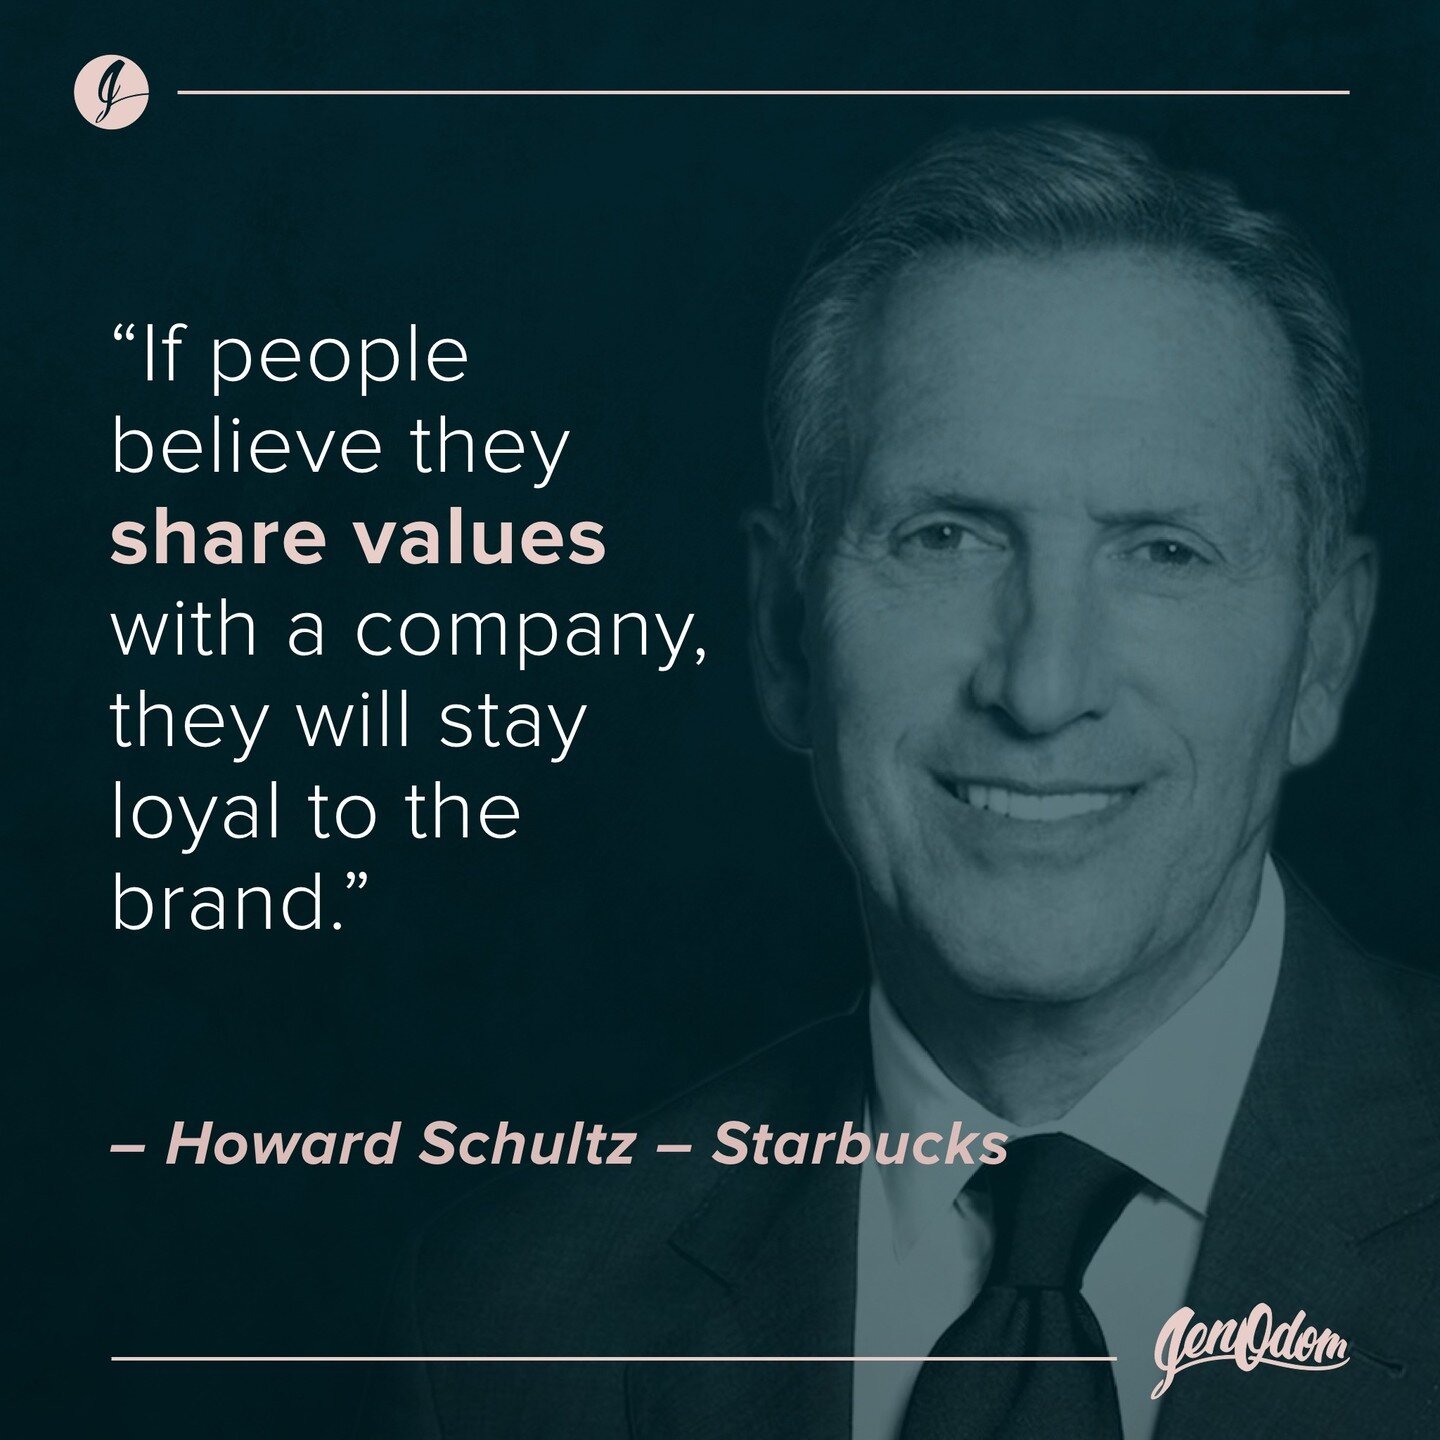 Let's talk about values. ⁠
⁠
Have you ever bought from a company because they believe in the same things you do? It's a part of our psychology. We want to be consistent in how we present ourselves including the products we buy, where we shop, whom we